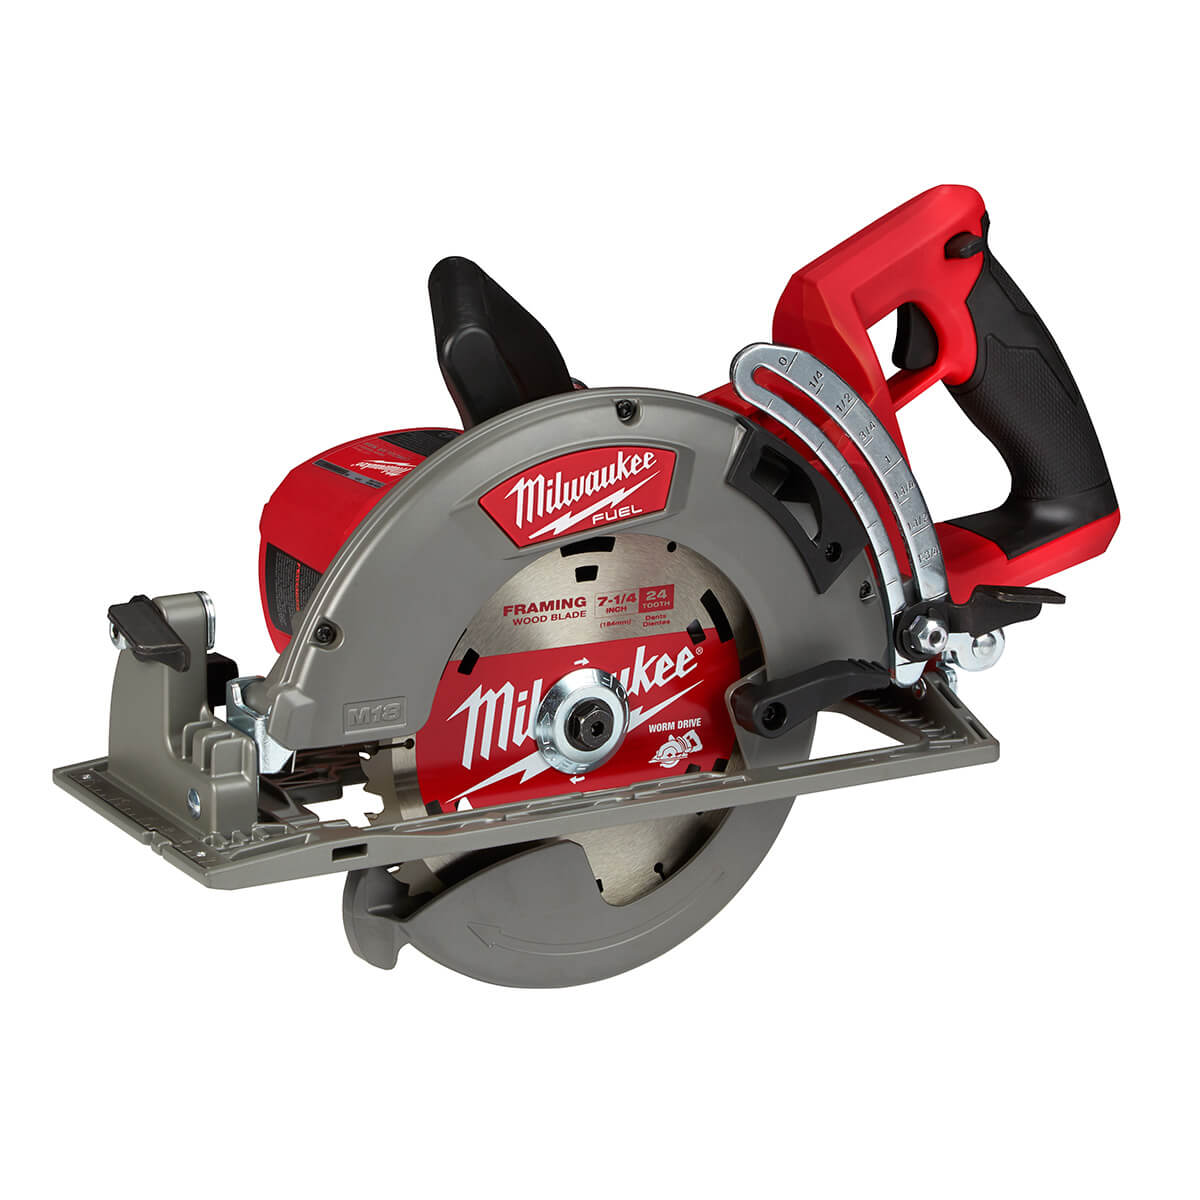 Milwaukee 2830-20 - M18 FUEL™ Rear Handle 7-1/4" Circular Saw - wise-line-tools